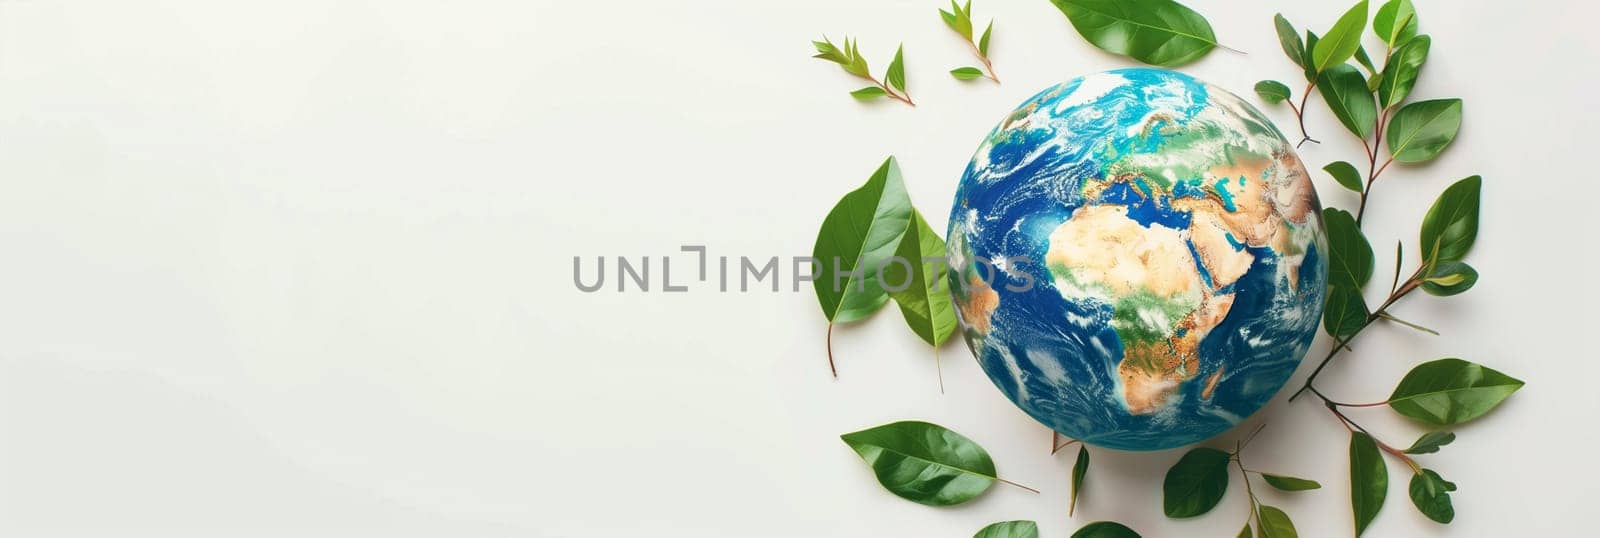 The Earth depicted as being encircled by lush green leaves against a white background, symbolizing the importance of nature and the environment on World Environment Day.